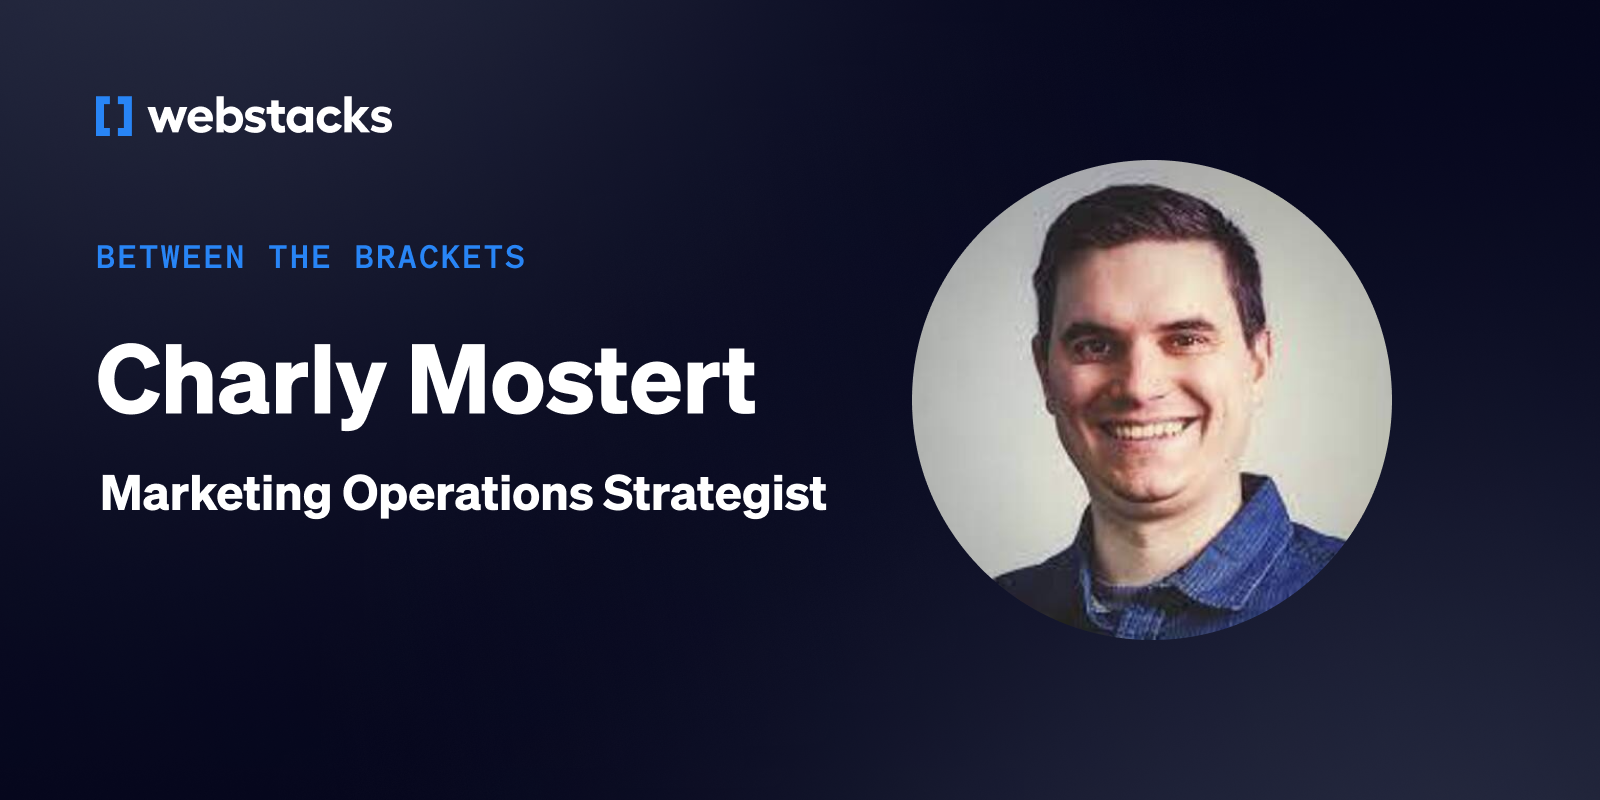 Between the Brackets: Charly Mostert, Marketing Operations Strategist